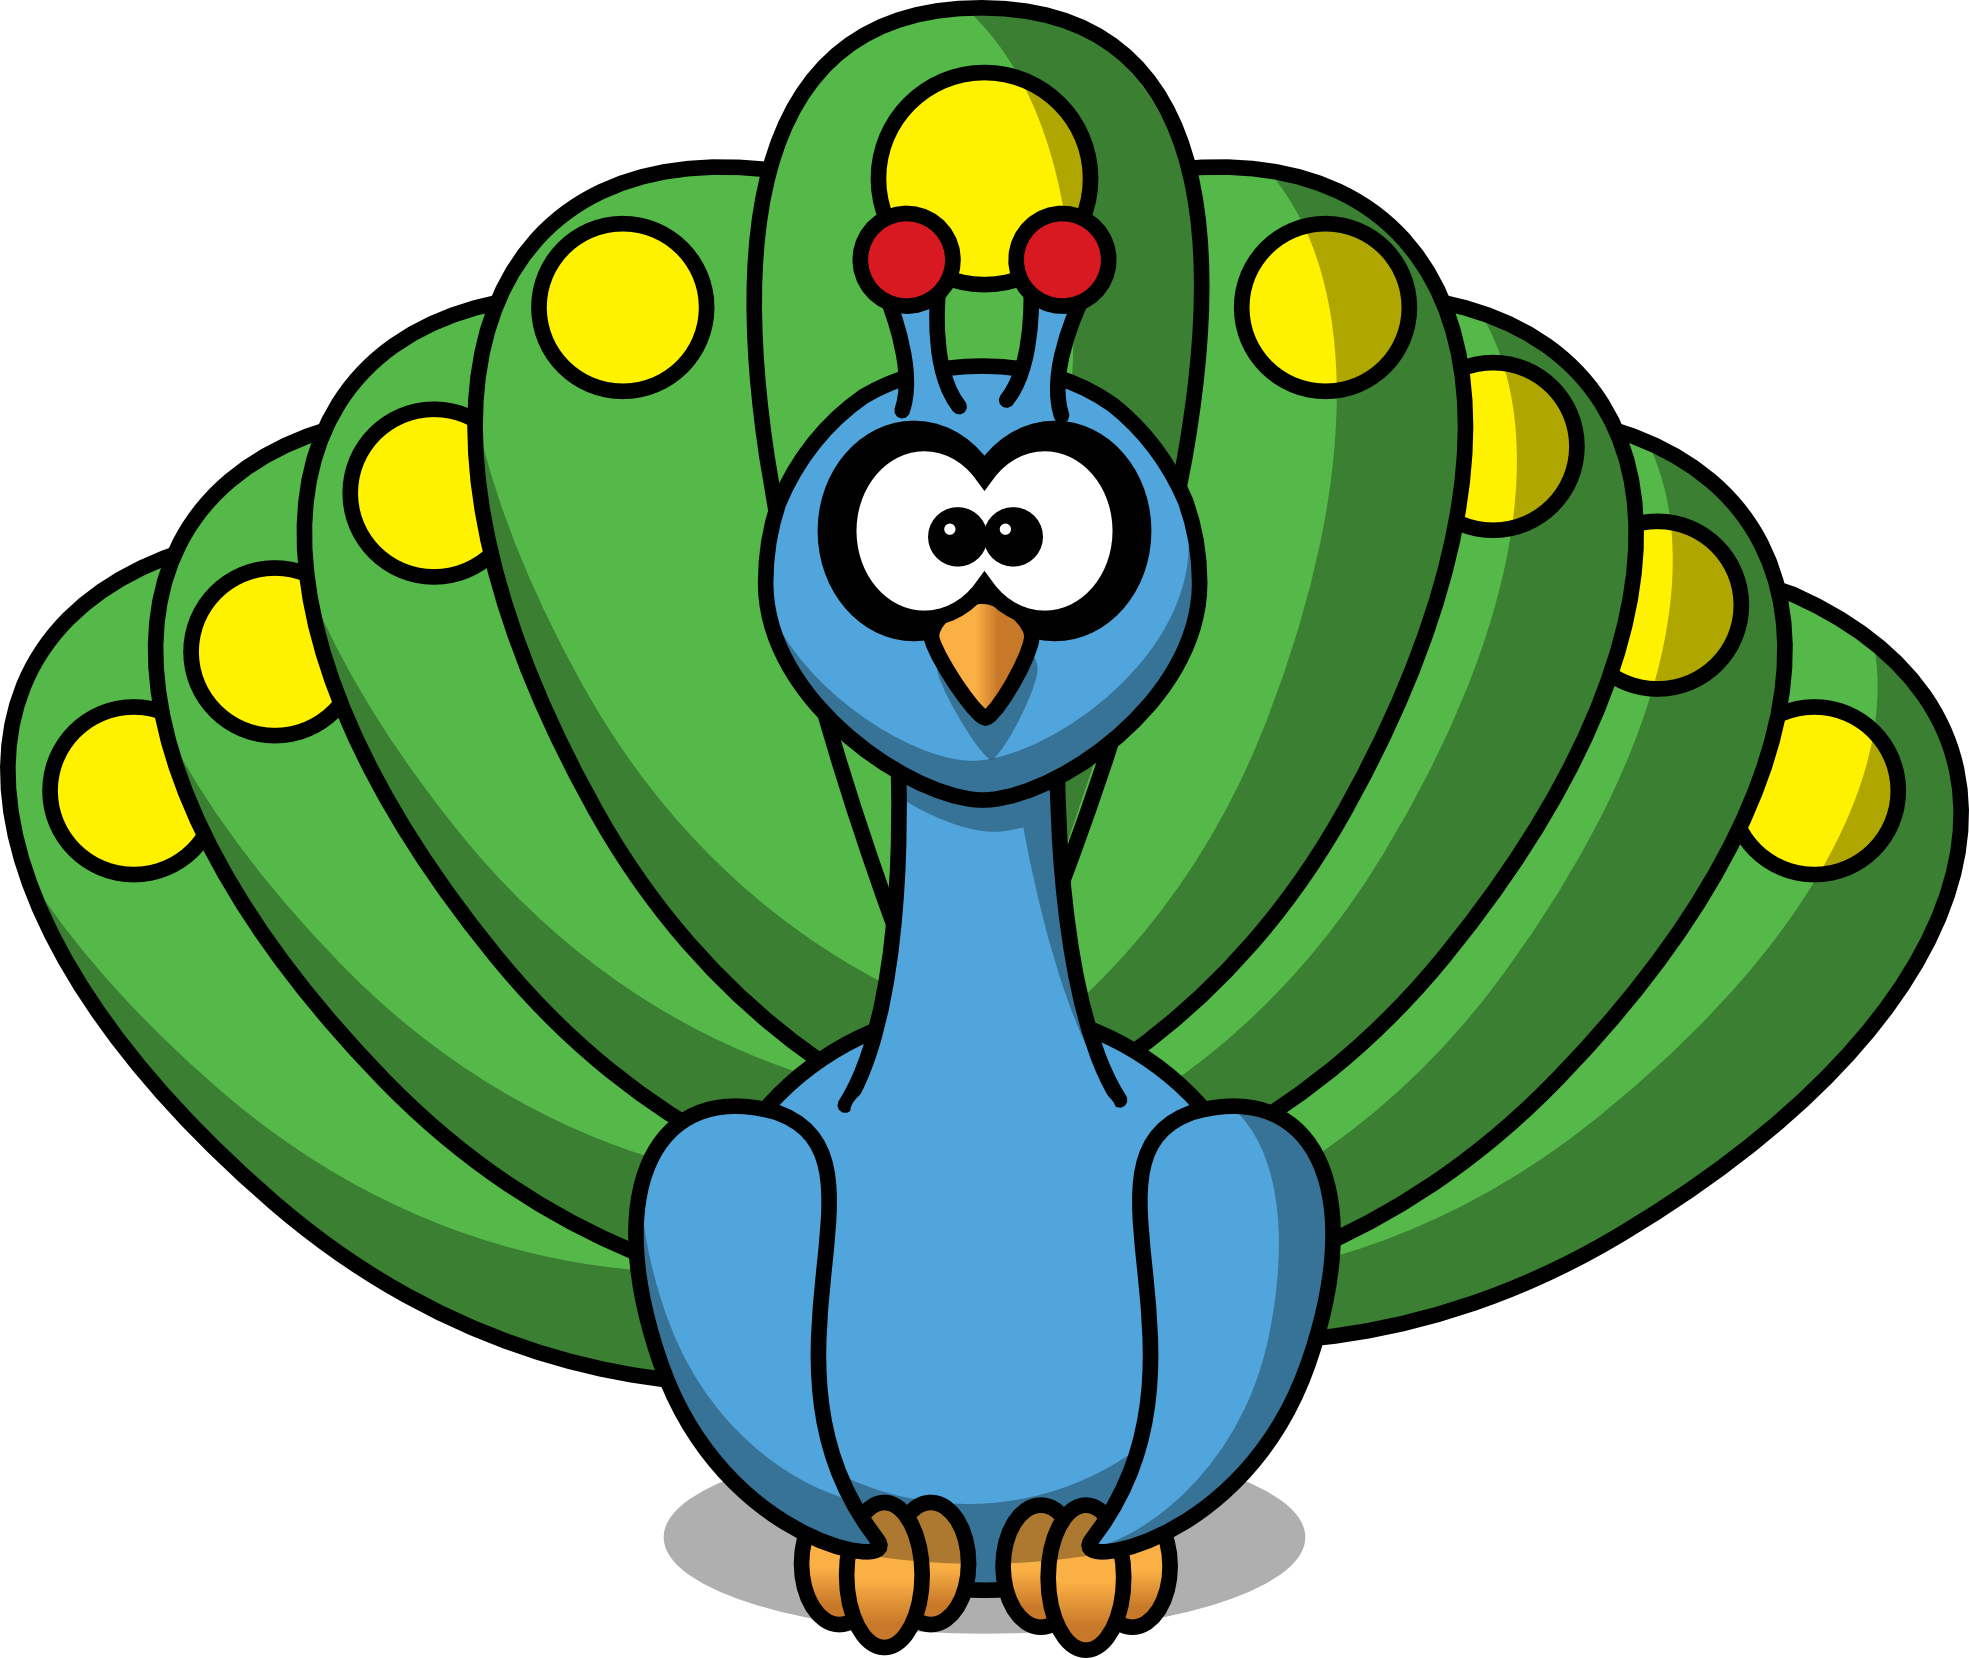 Peacock clipart free clipart images 2